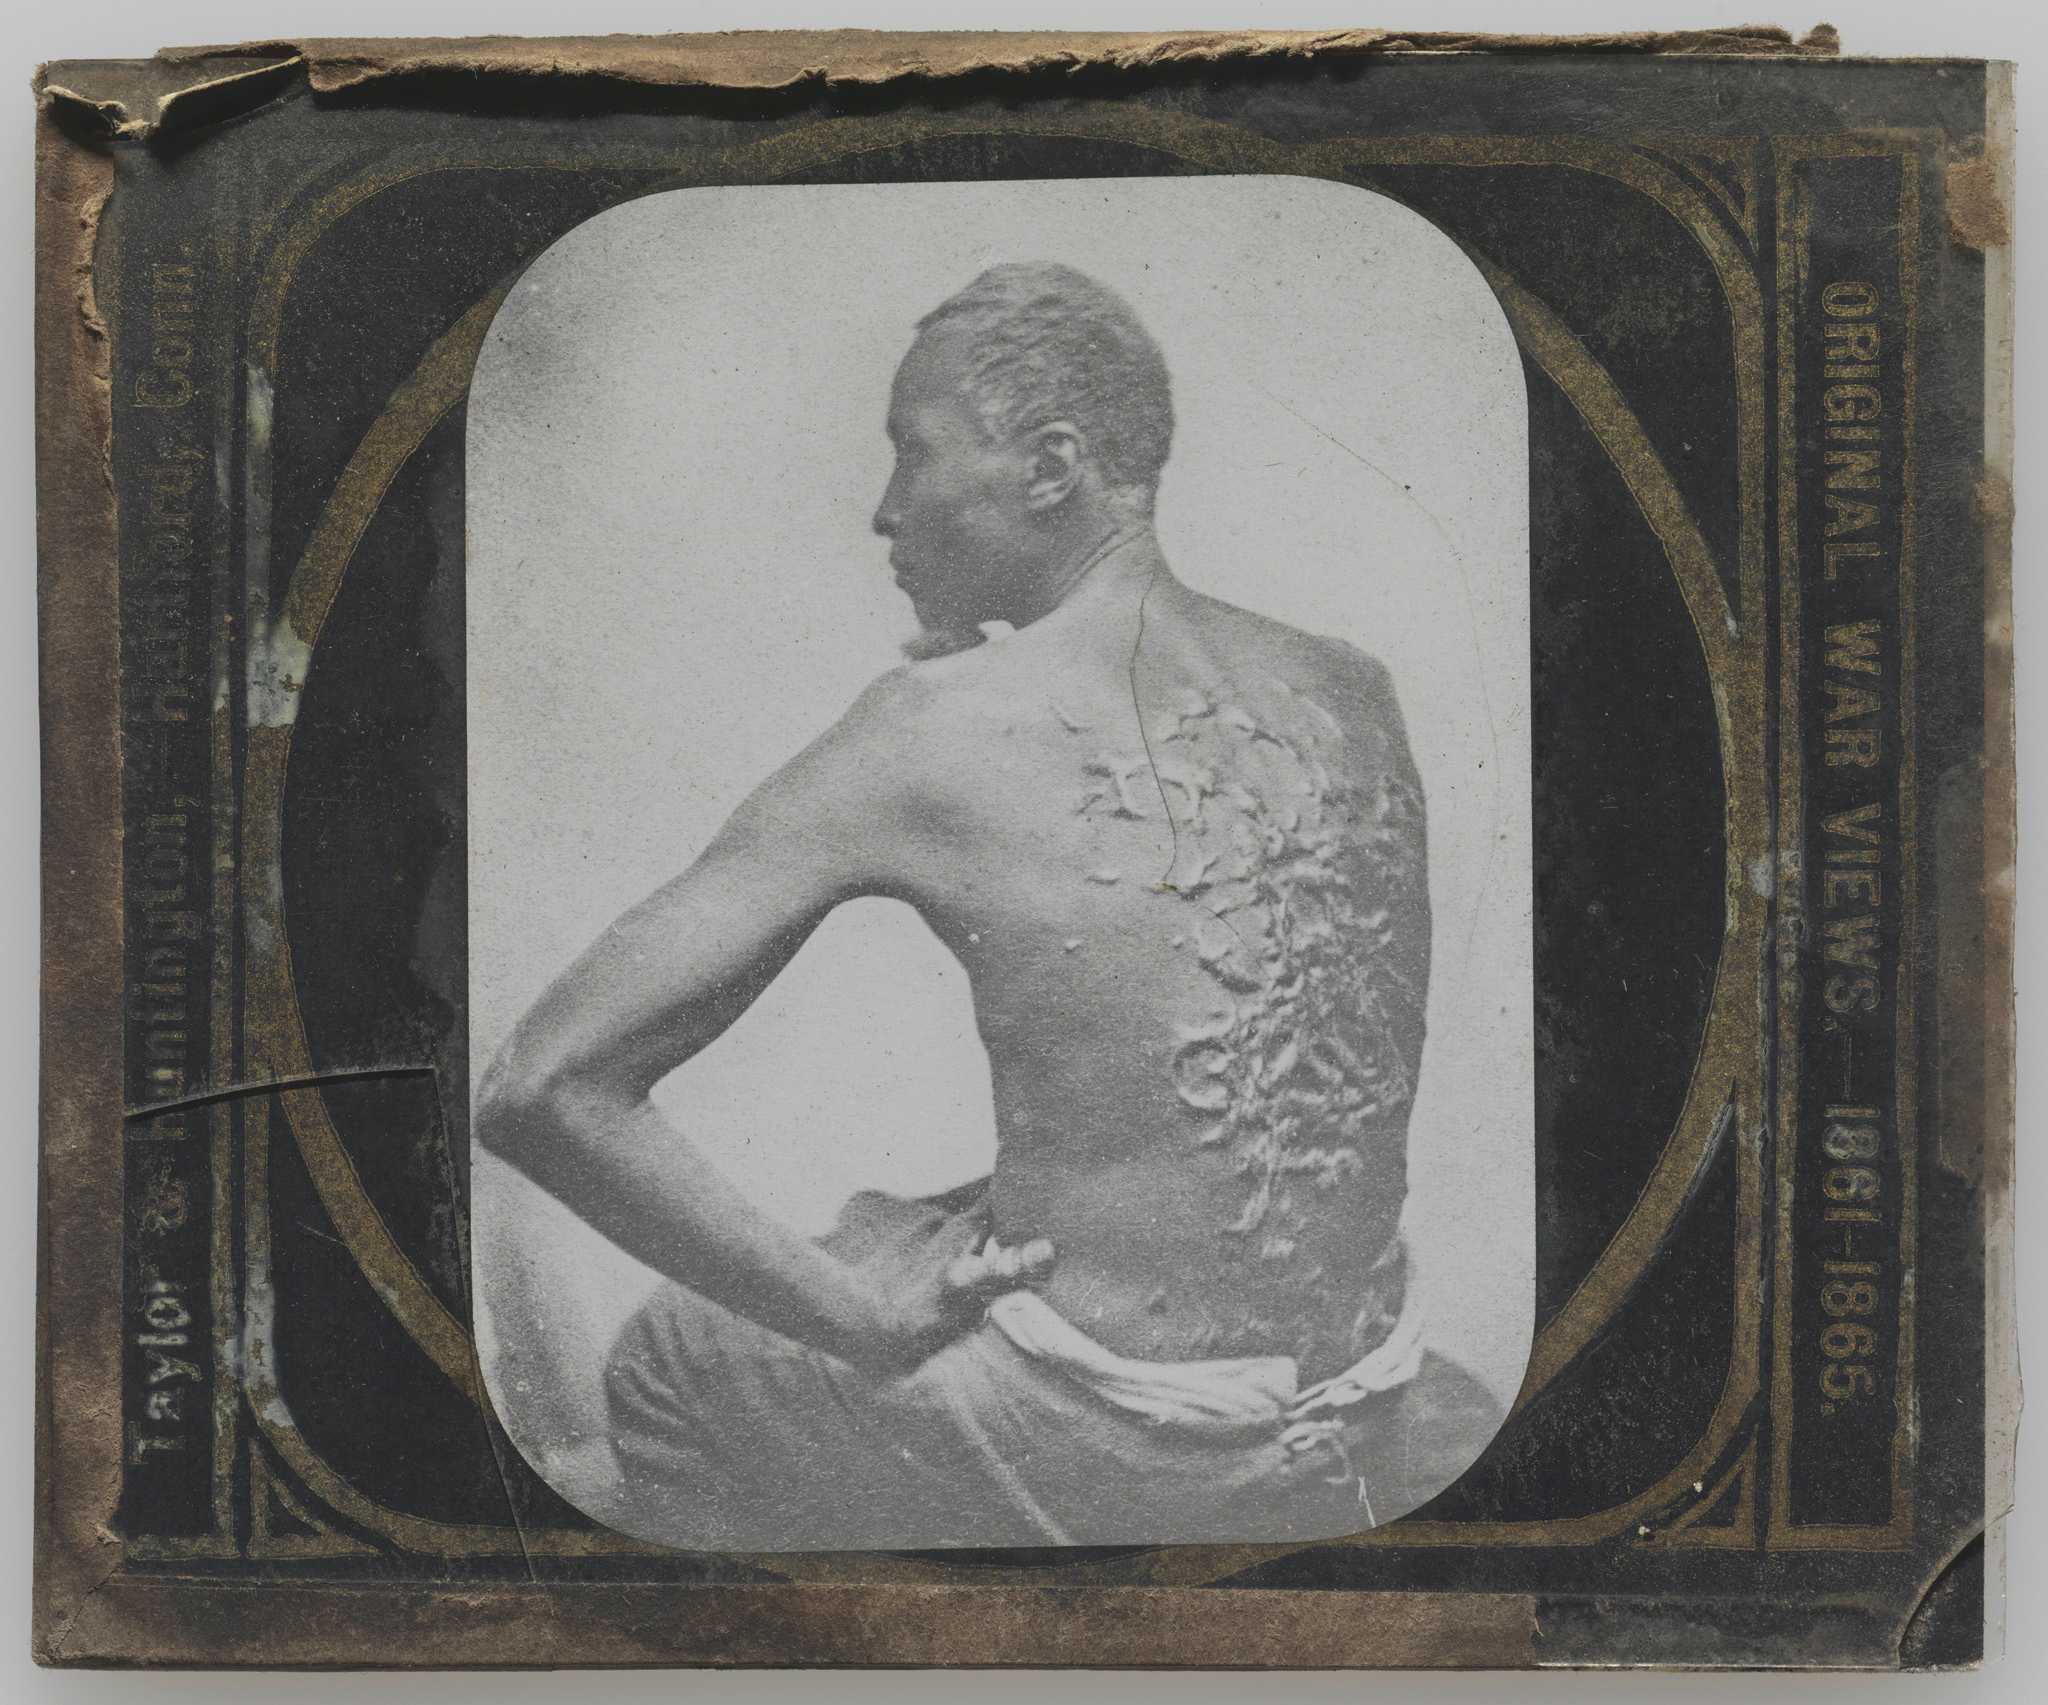 A glass plate photographic "magic lantern" slide depicting the bare back of an enslaved man with multiple raised scars. The slide has a black and gold paper sleeve and is in a plain wooden slide mount. There is a short crack in the lower left corner of the upper glass plate. The image depicts a man, often identified as "Gordon," or "Private Gordon," and sometimes as "Peter," seated with his shirtless back to the camera. His proper left hand is on his left hip, his elbow extended, and his face is turned to the left. Along the right side of the sleeve is printed [ORIGINAL WAR VIEWS - 1861-1865]  and on the left is [Taylor & Huntington - Hartford, Conn.].